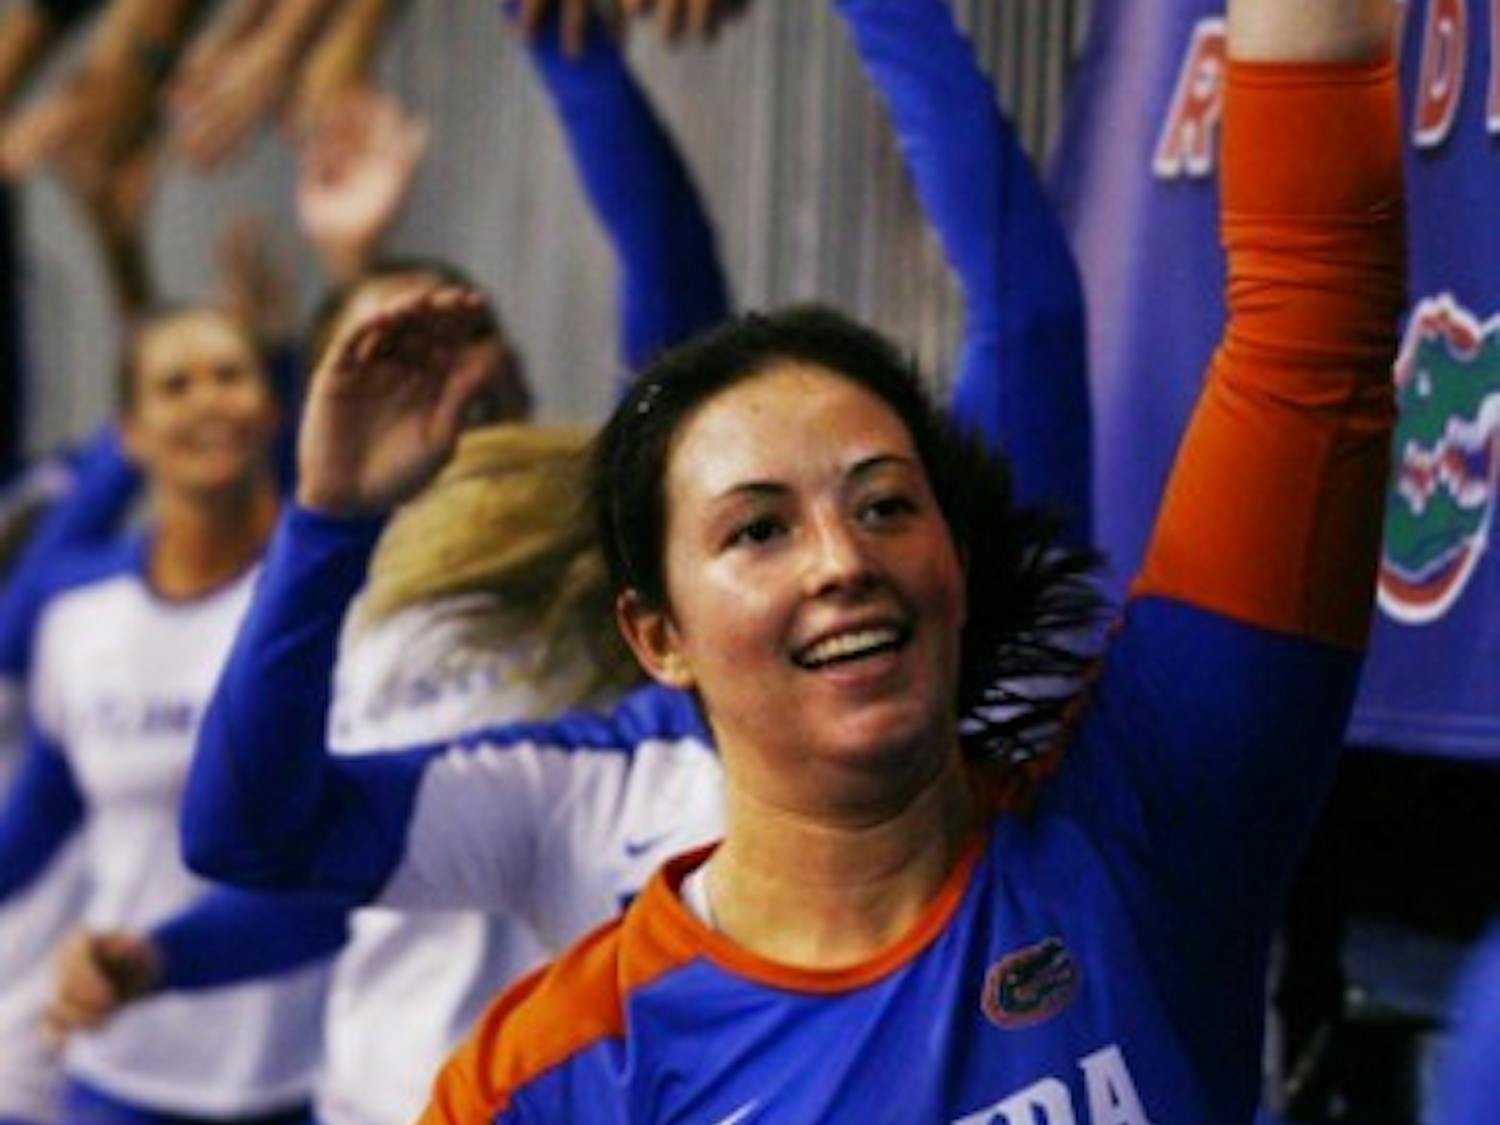 Redshirt freshman Taylor Unroe went through a rough patch in her life after the death of her sister, Ashlee, in 2007. Now a libero for the Gators, Unroe still uses the memory of Ashlee as motivation to pursue her goals.